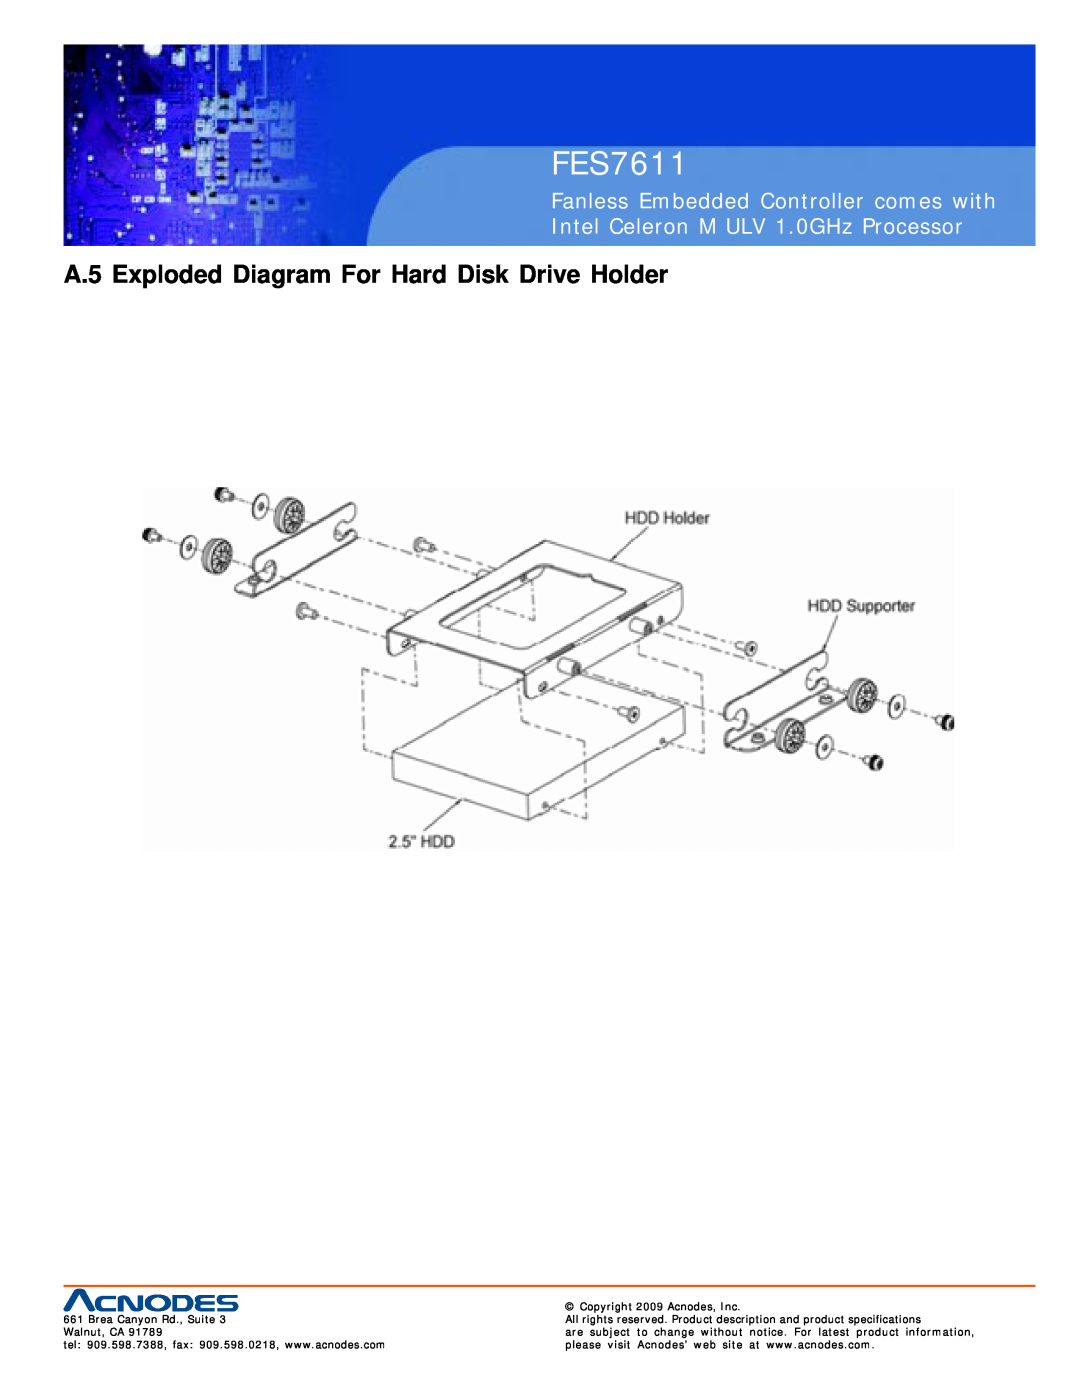 Acnodes FES7611 A.5 Exploded Diagram For Hard Disk Drive Holder, Fanless Embedded Controller comes with, Walnut, CA 